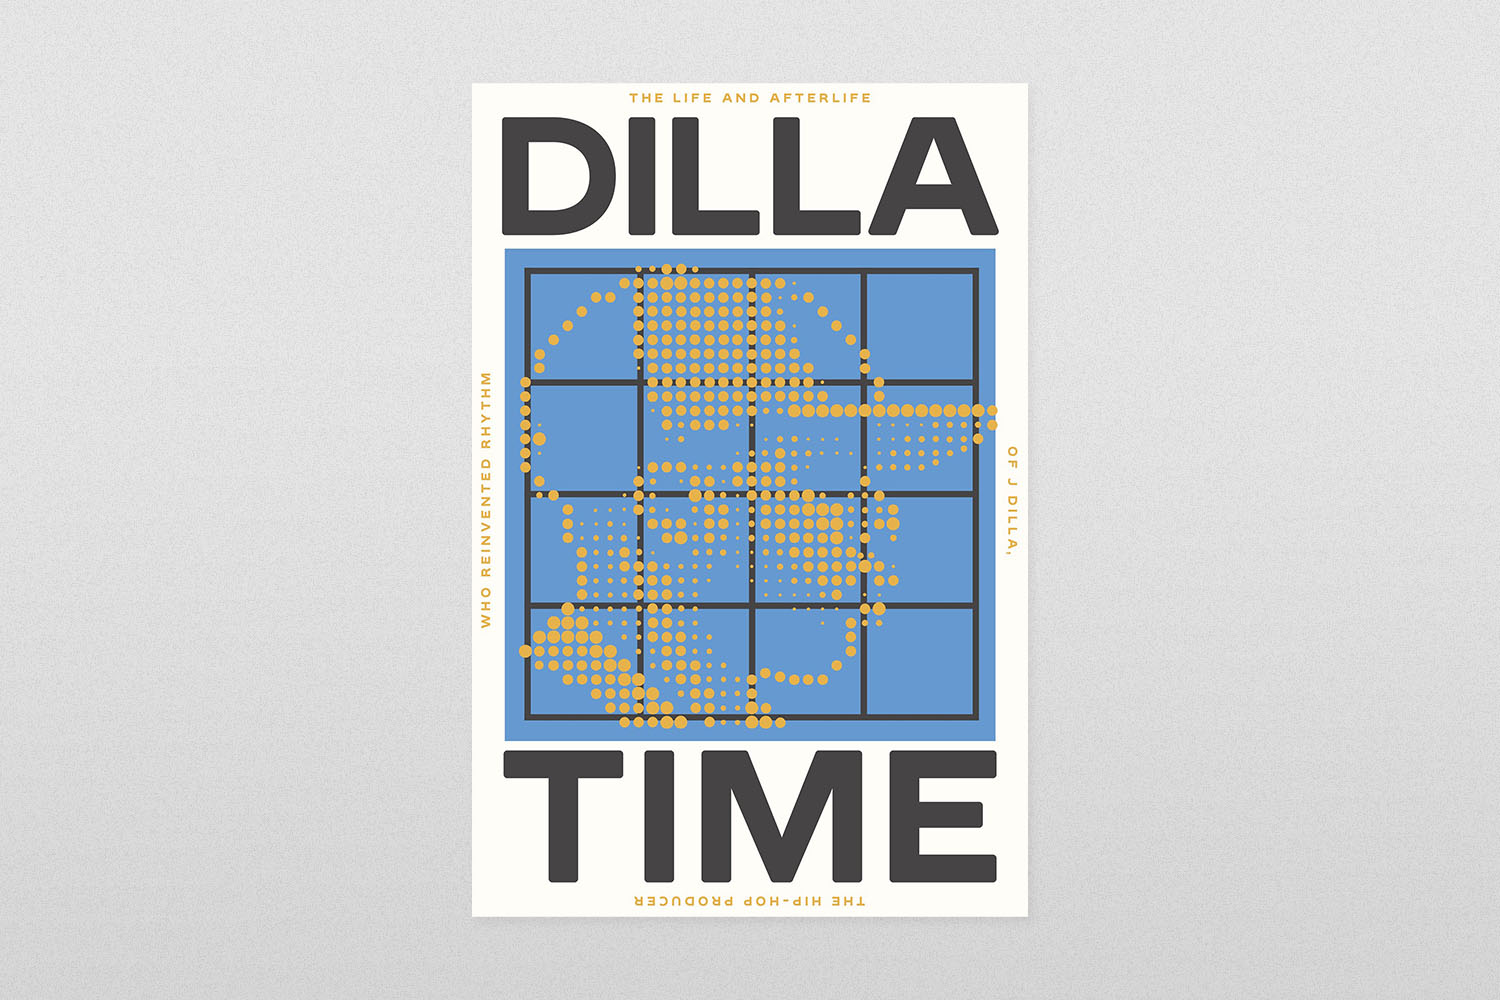 Dilla Time- The Life and Afterlife of J Dilla, the Hip-Hop Producer Who Reinvented Rhythm